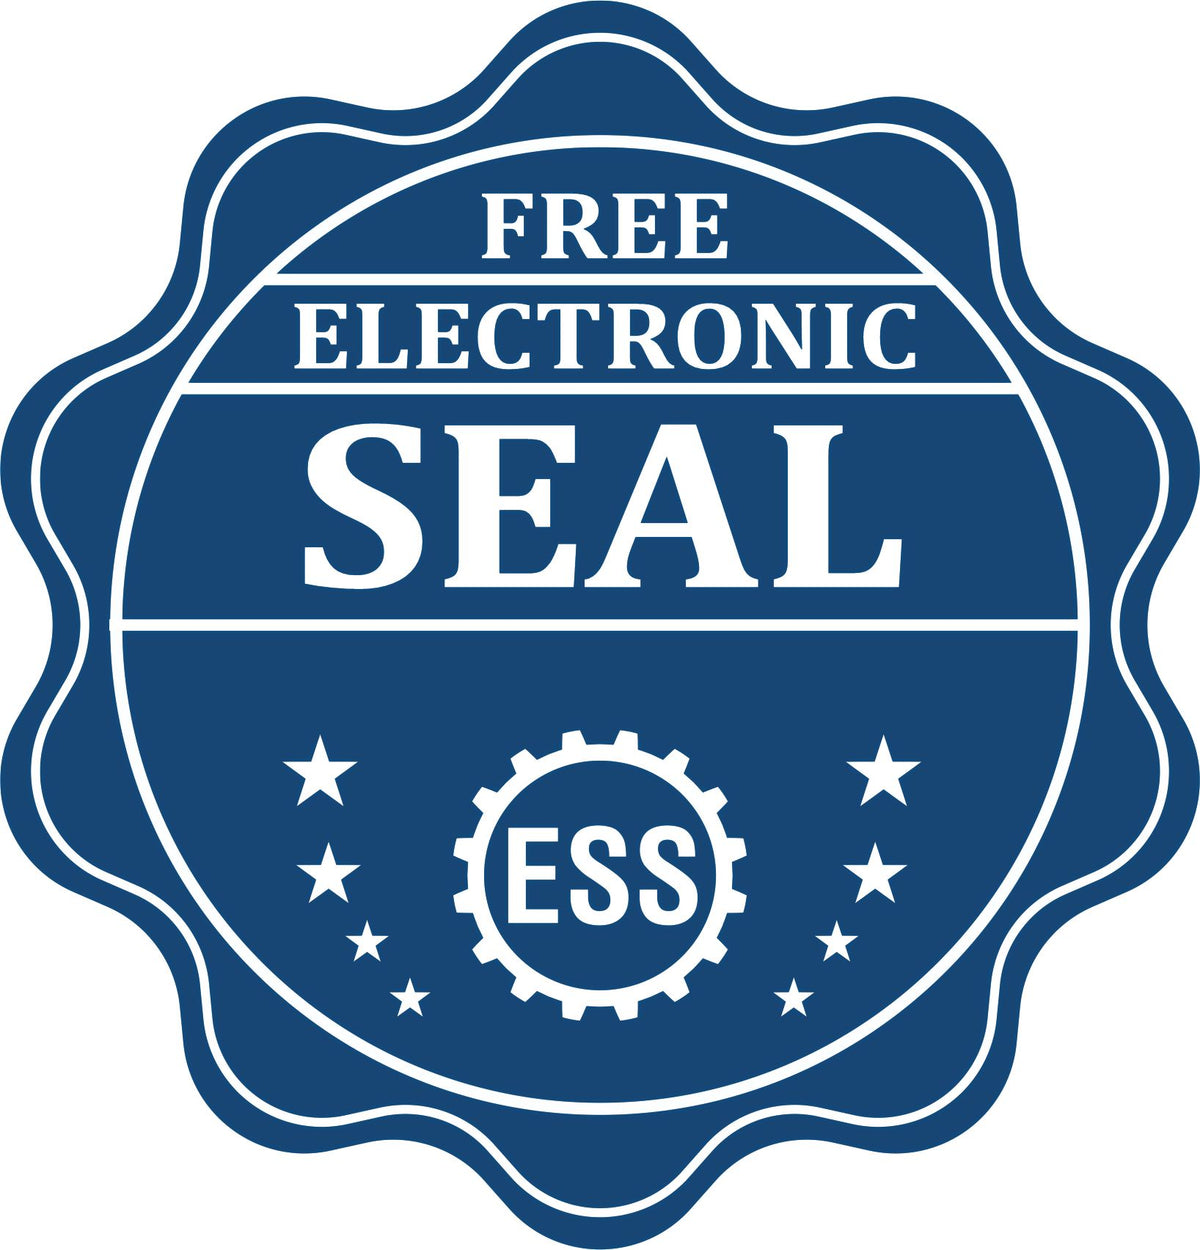 A badge showing a free electronic seal for the Heavy-Duty West Virginia Rectangular Notary Stamp with stars and the ESS gear on the emblem.